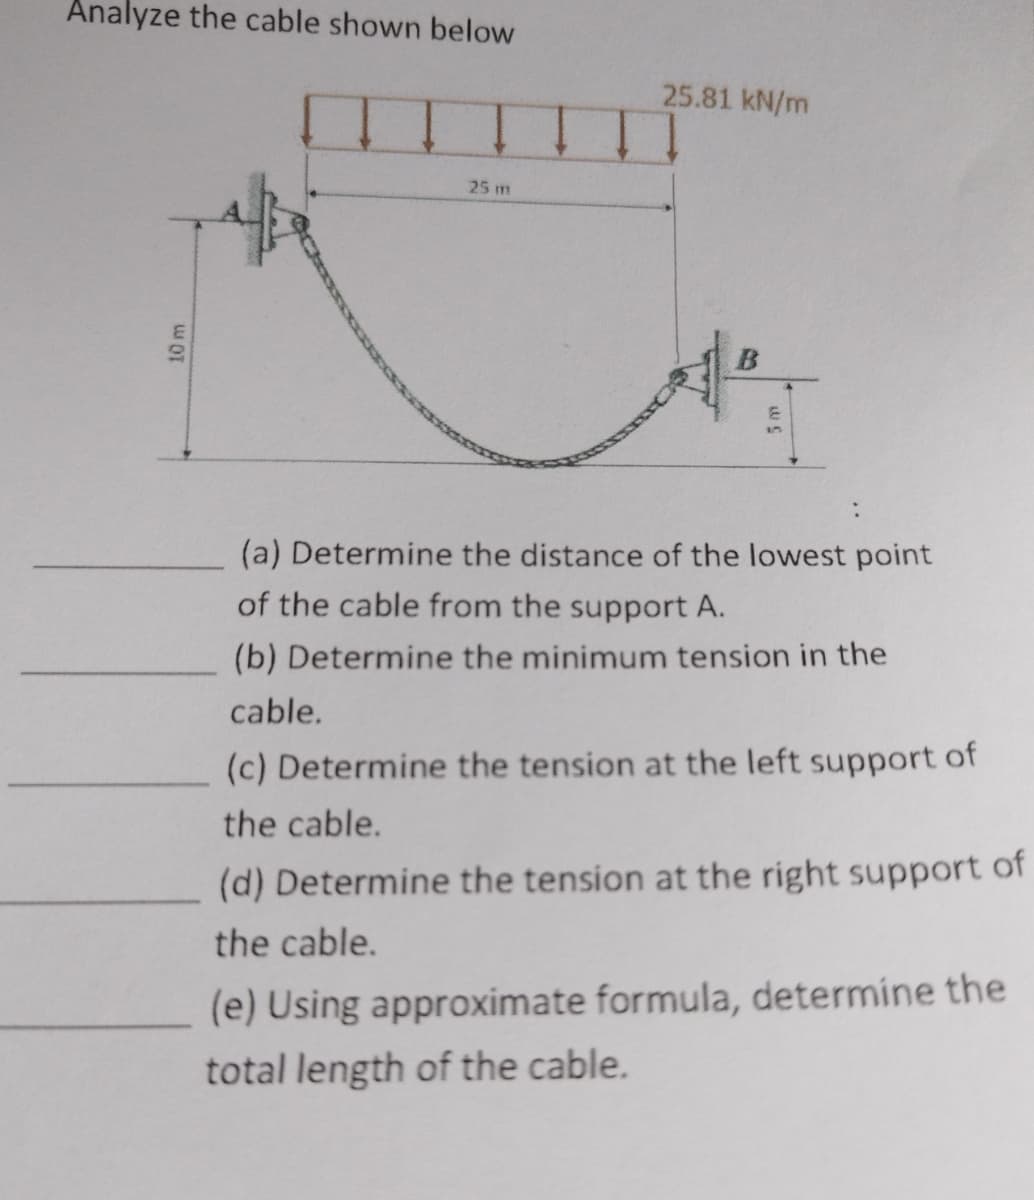 Analyze the cable shown below
25.81 kN/m
10 m
25 m
(a) Determine the distance of the lowest point
of the cable from the support A.
(b) Determine the minimum tension in the
cable.
(c) Determine the tension at the left support of
the cable.
(d) Determine the tension at the right support of
the cable.
(e) Using approximate formula, determine the
total length of the cable.